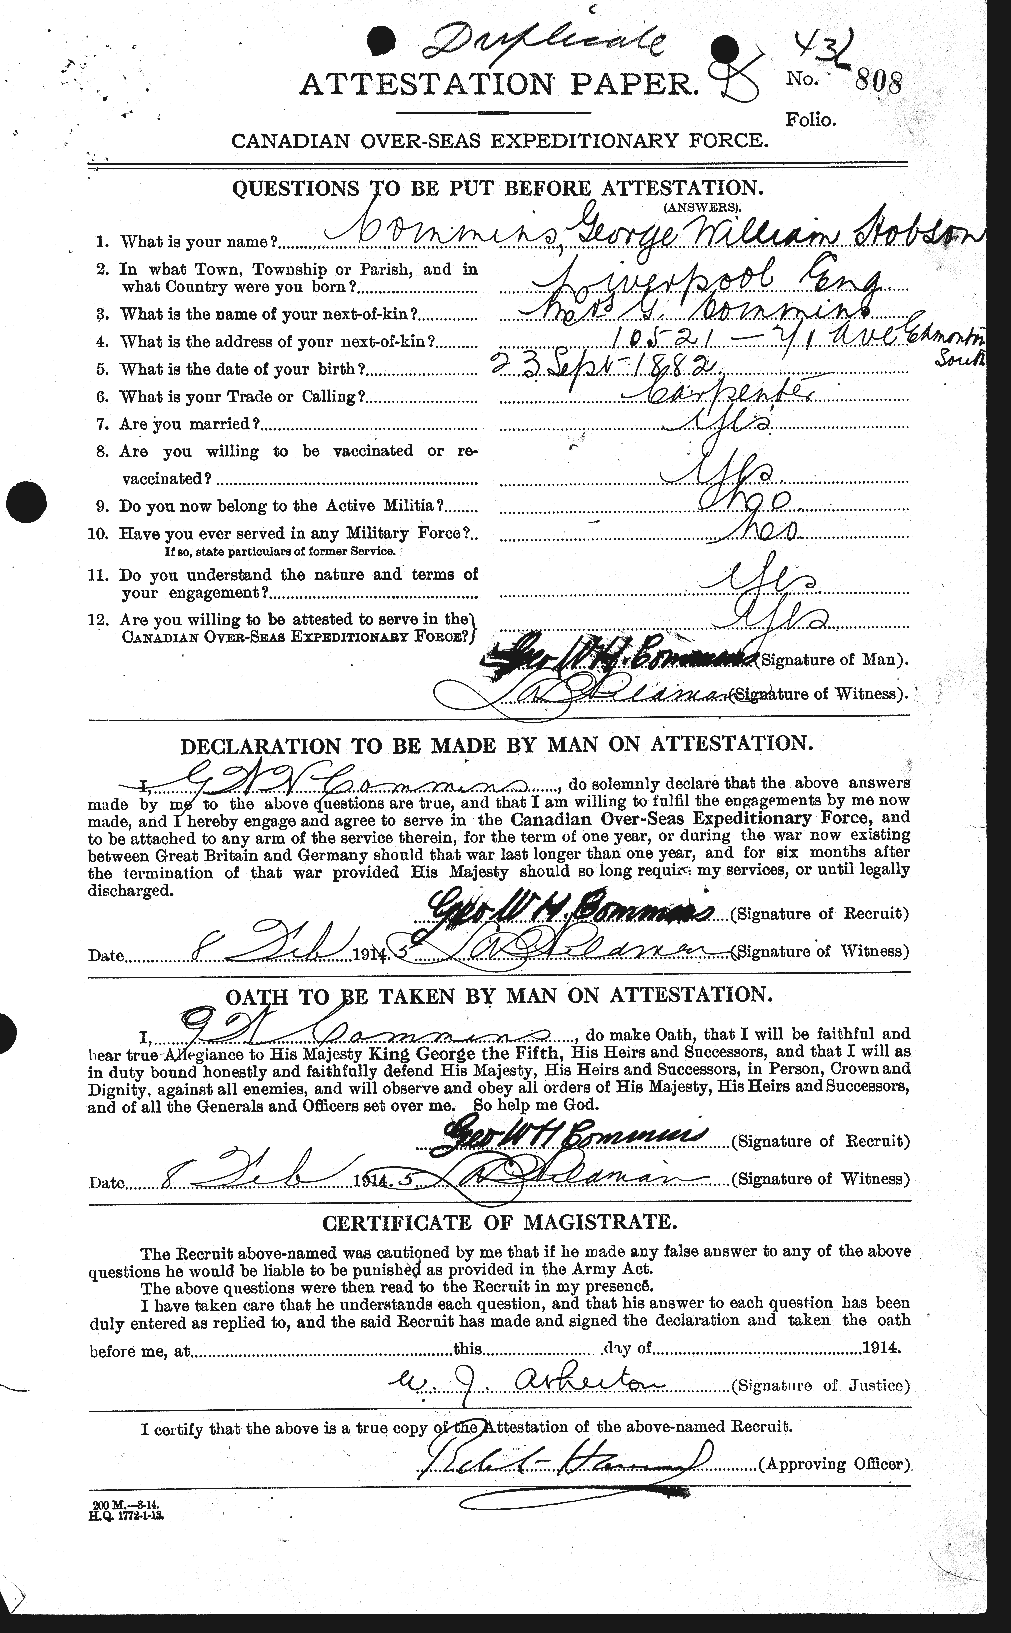 Personnel Records of the First World War - CEF 068737a